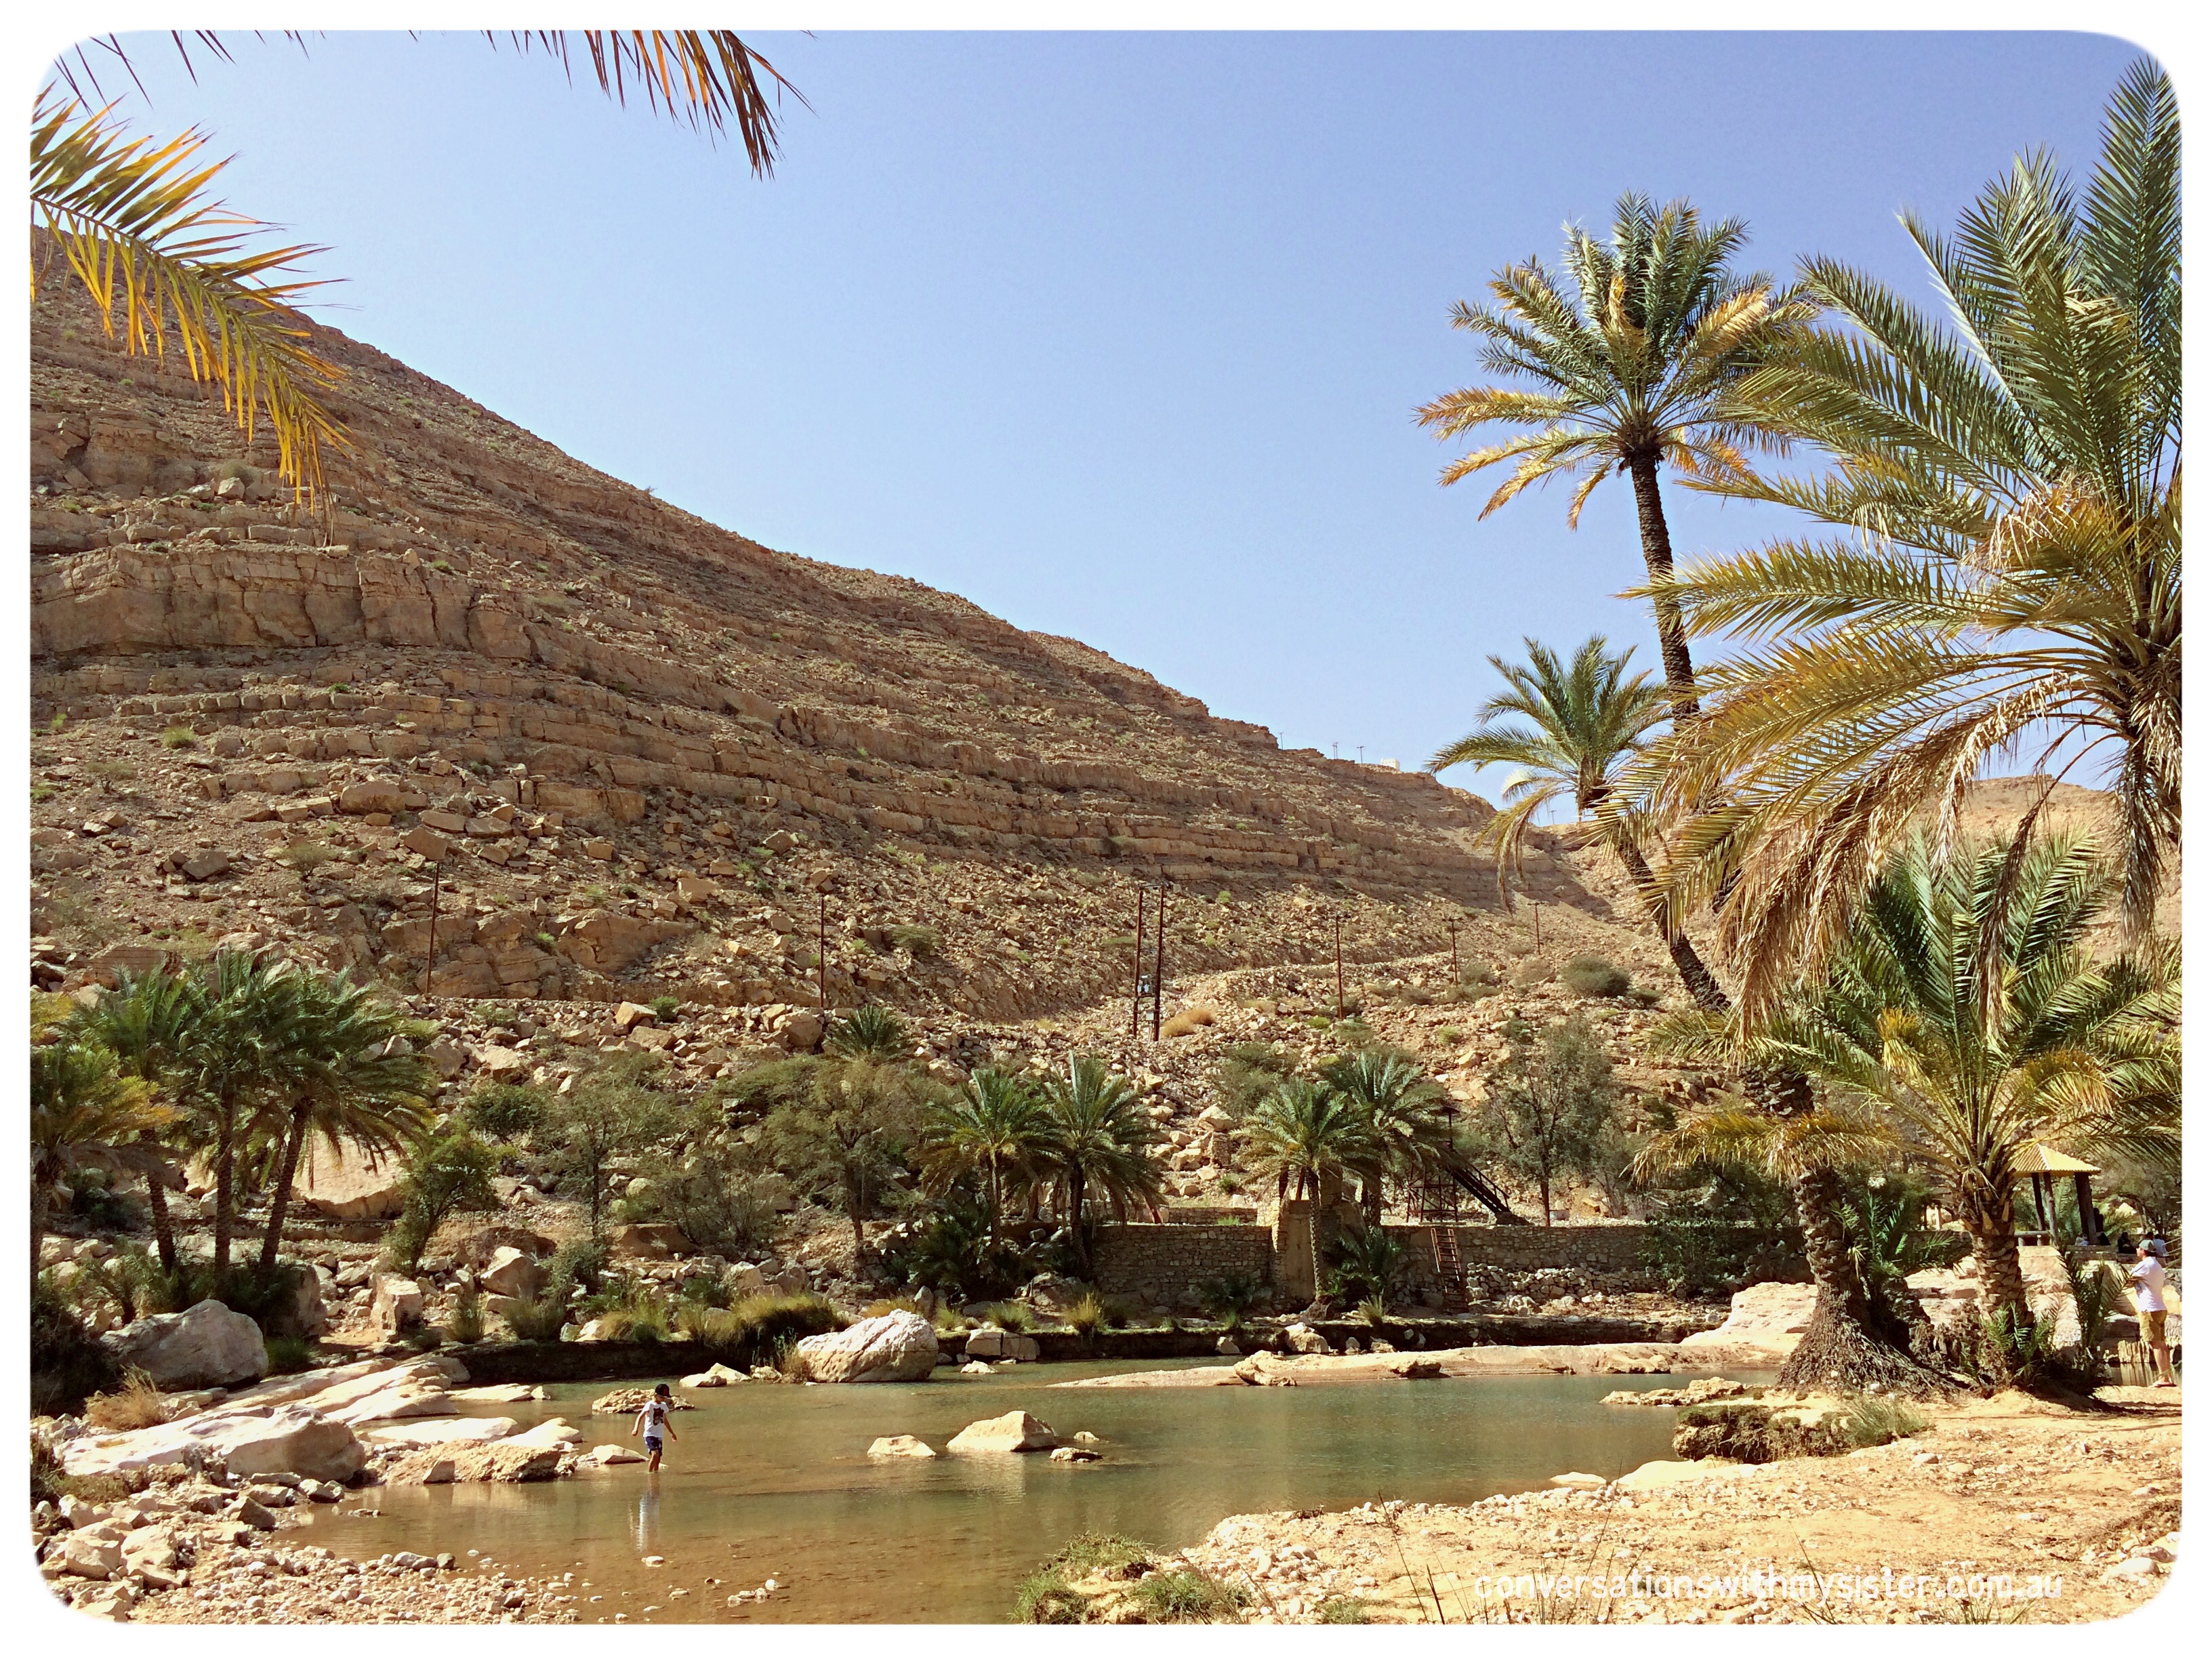 You will find Wadi Bani Khalid in the unique Sultanate of Oman and if you ever have the opportunity to visit you should take it! What makes the Sultanate of Oman unique is the combination of historical settlements, diverse landscape and ecological history, topped off with the warm welcome from the proud locals. No wonder Oman has been listed as one of the Top Tourist Destinations of 2016. Read more to see why...